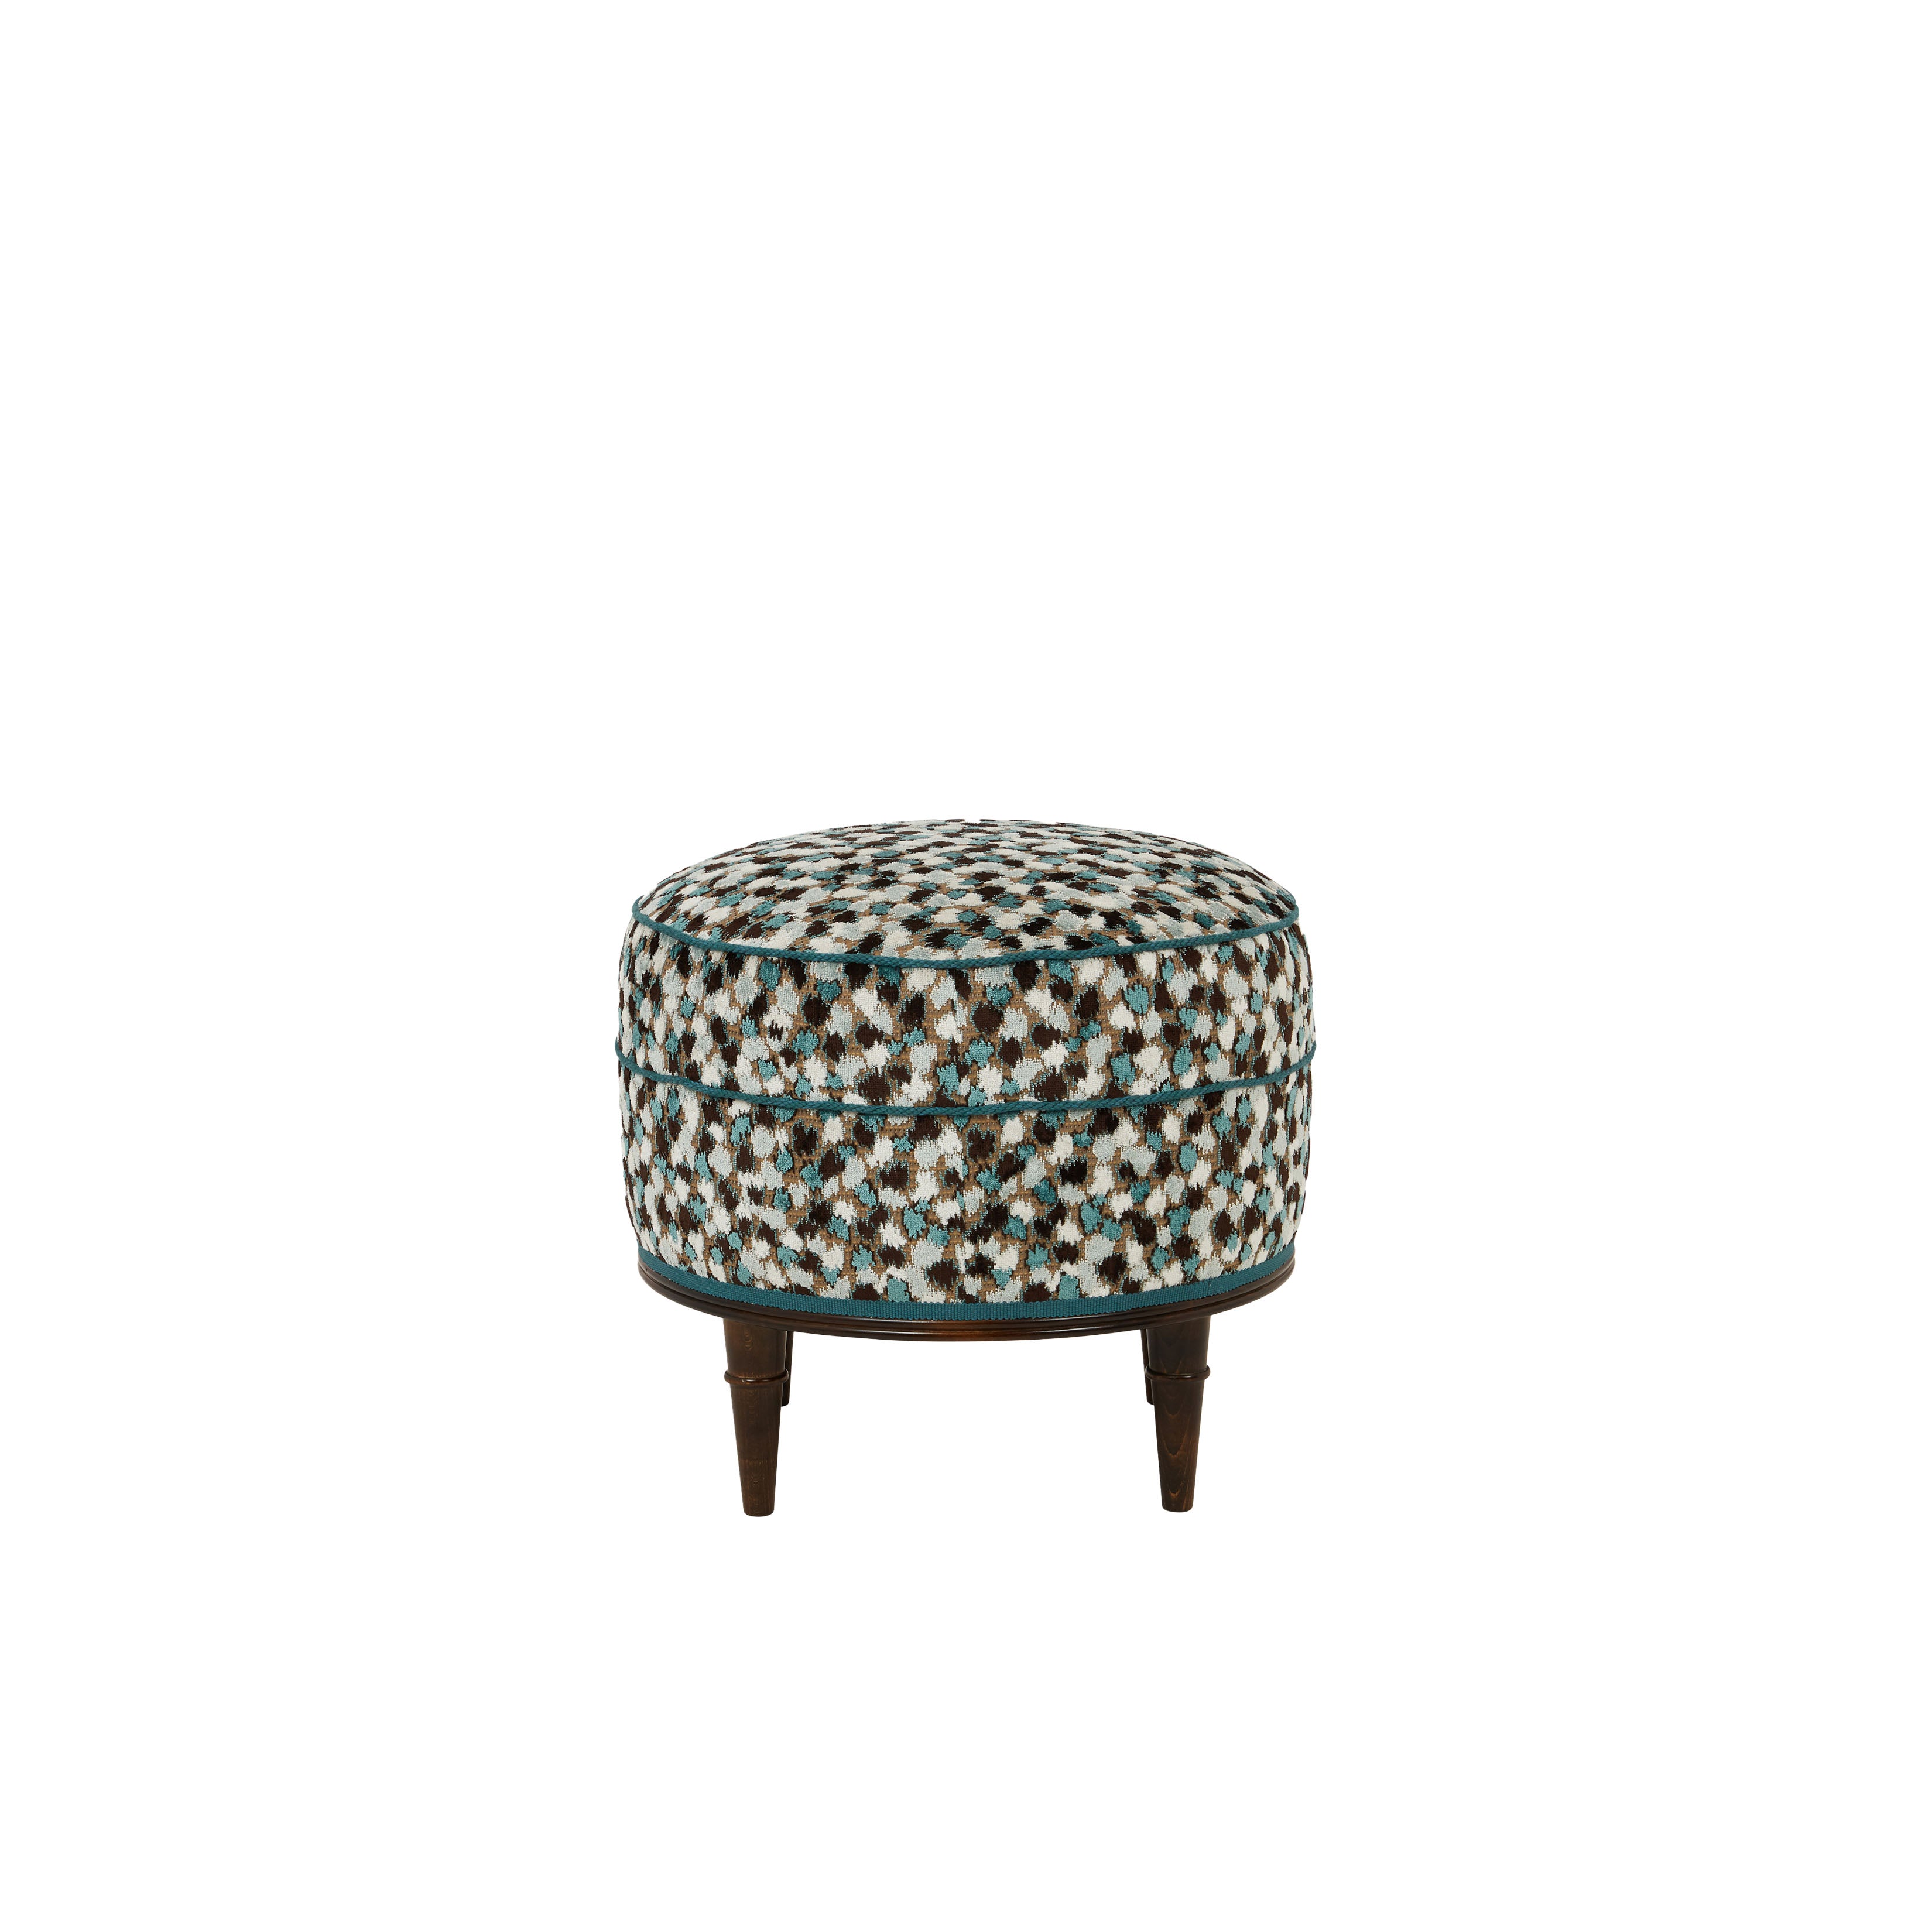 Nina Campbell Alice Stool in Orford Topaz/Chocolate/Ivory